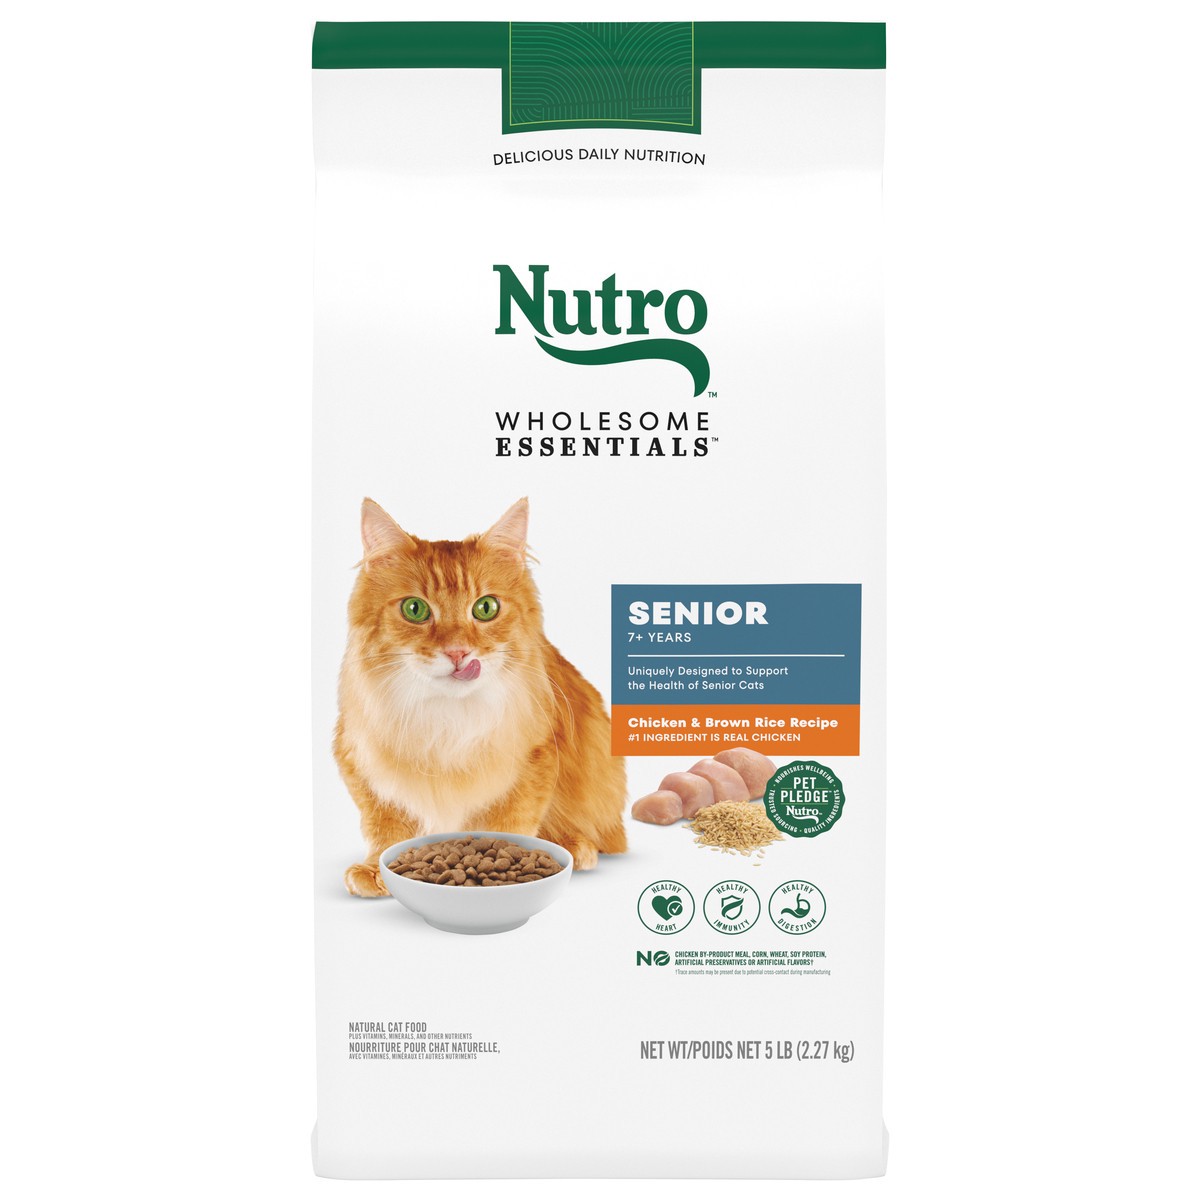 slide 7 of 16, Nutro Wholesome Essentials Senior 7+ Years Chicken & Brown Rice Recipe Cat Food 5 lb, 5 lb